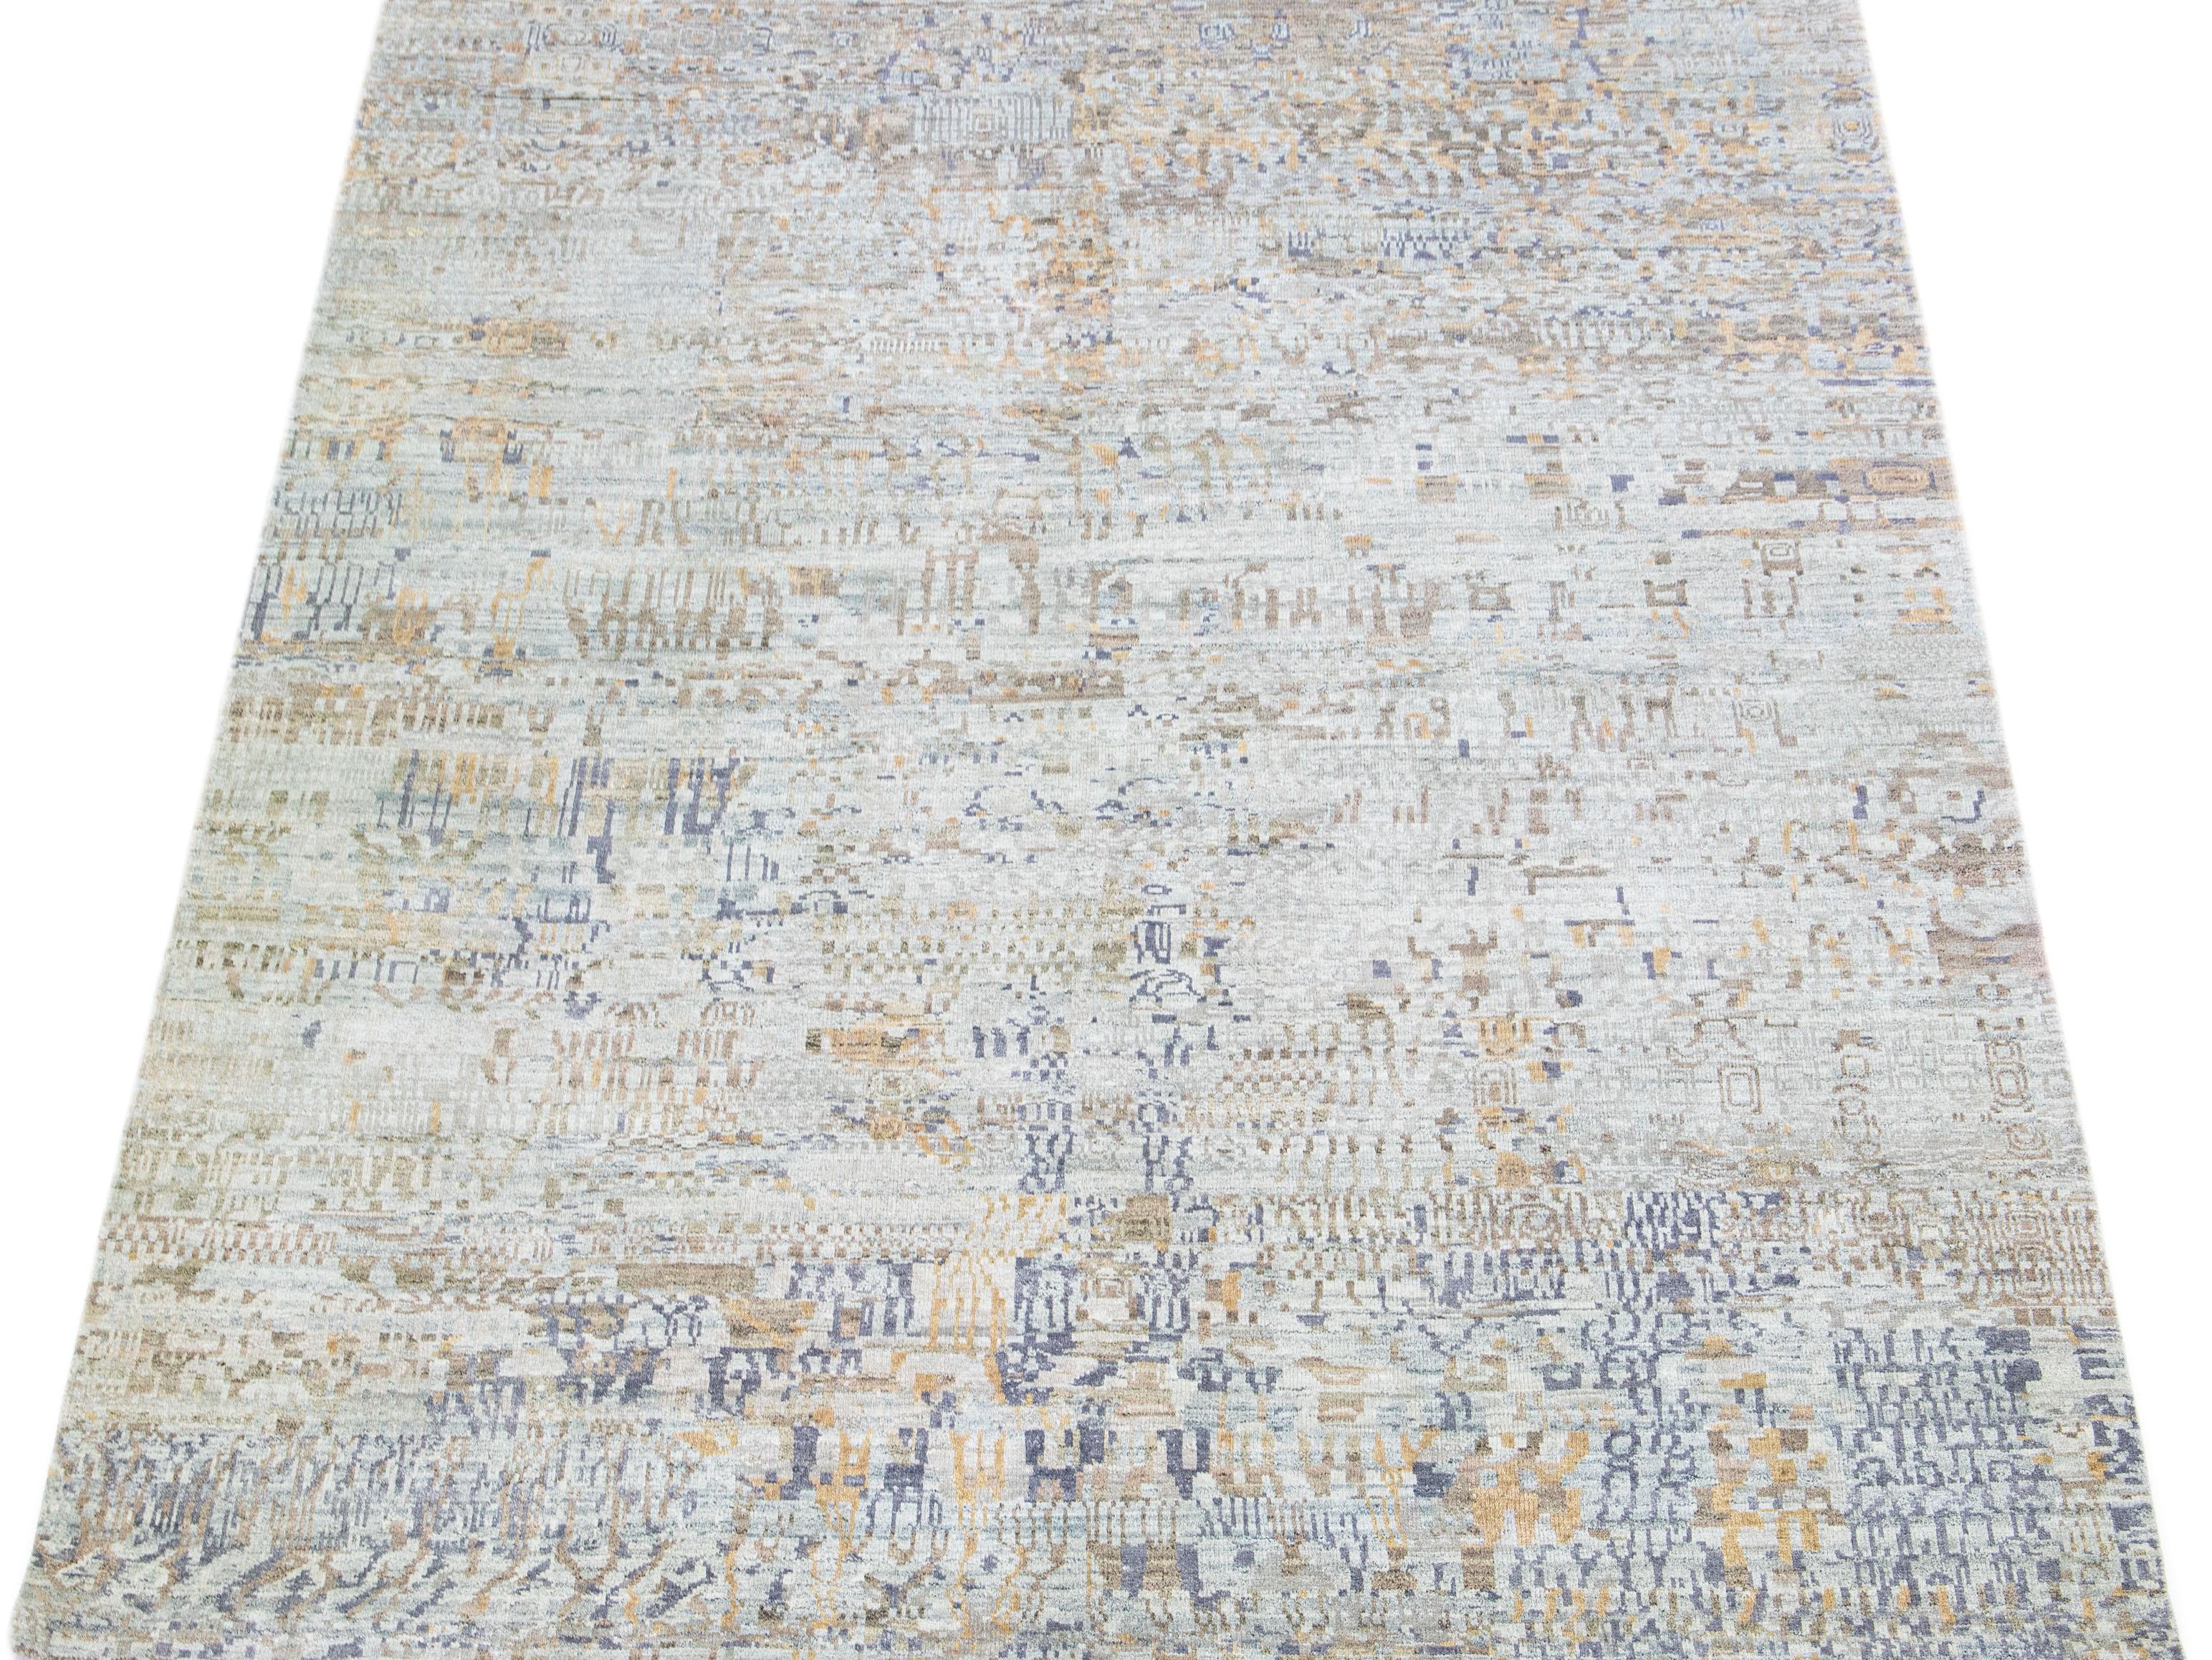 The contemporary design of this wool and silk rug showcases an enthralling tribal motif in a delicate grey shade. The tan accents uniquely enhance the abstract pattern.

This rug measures 7'10